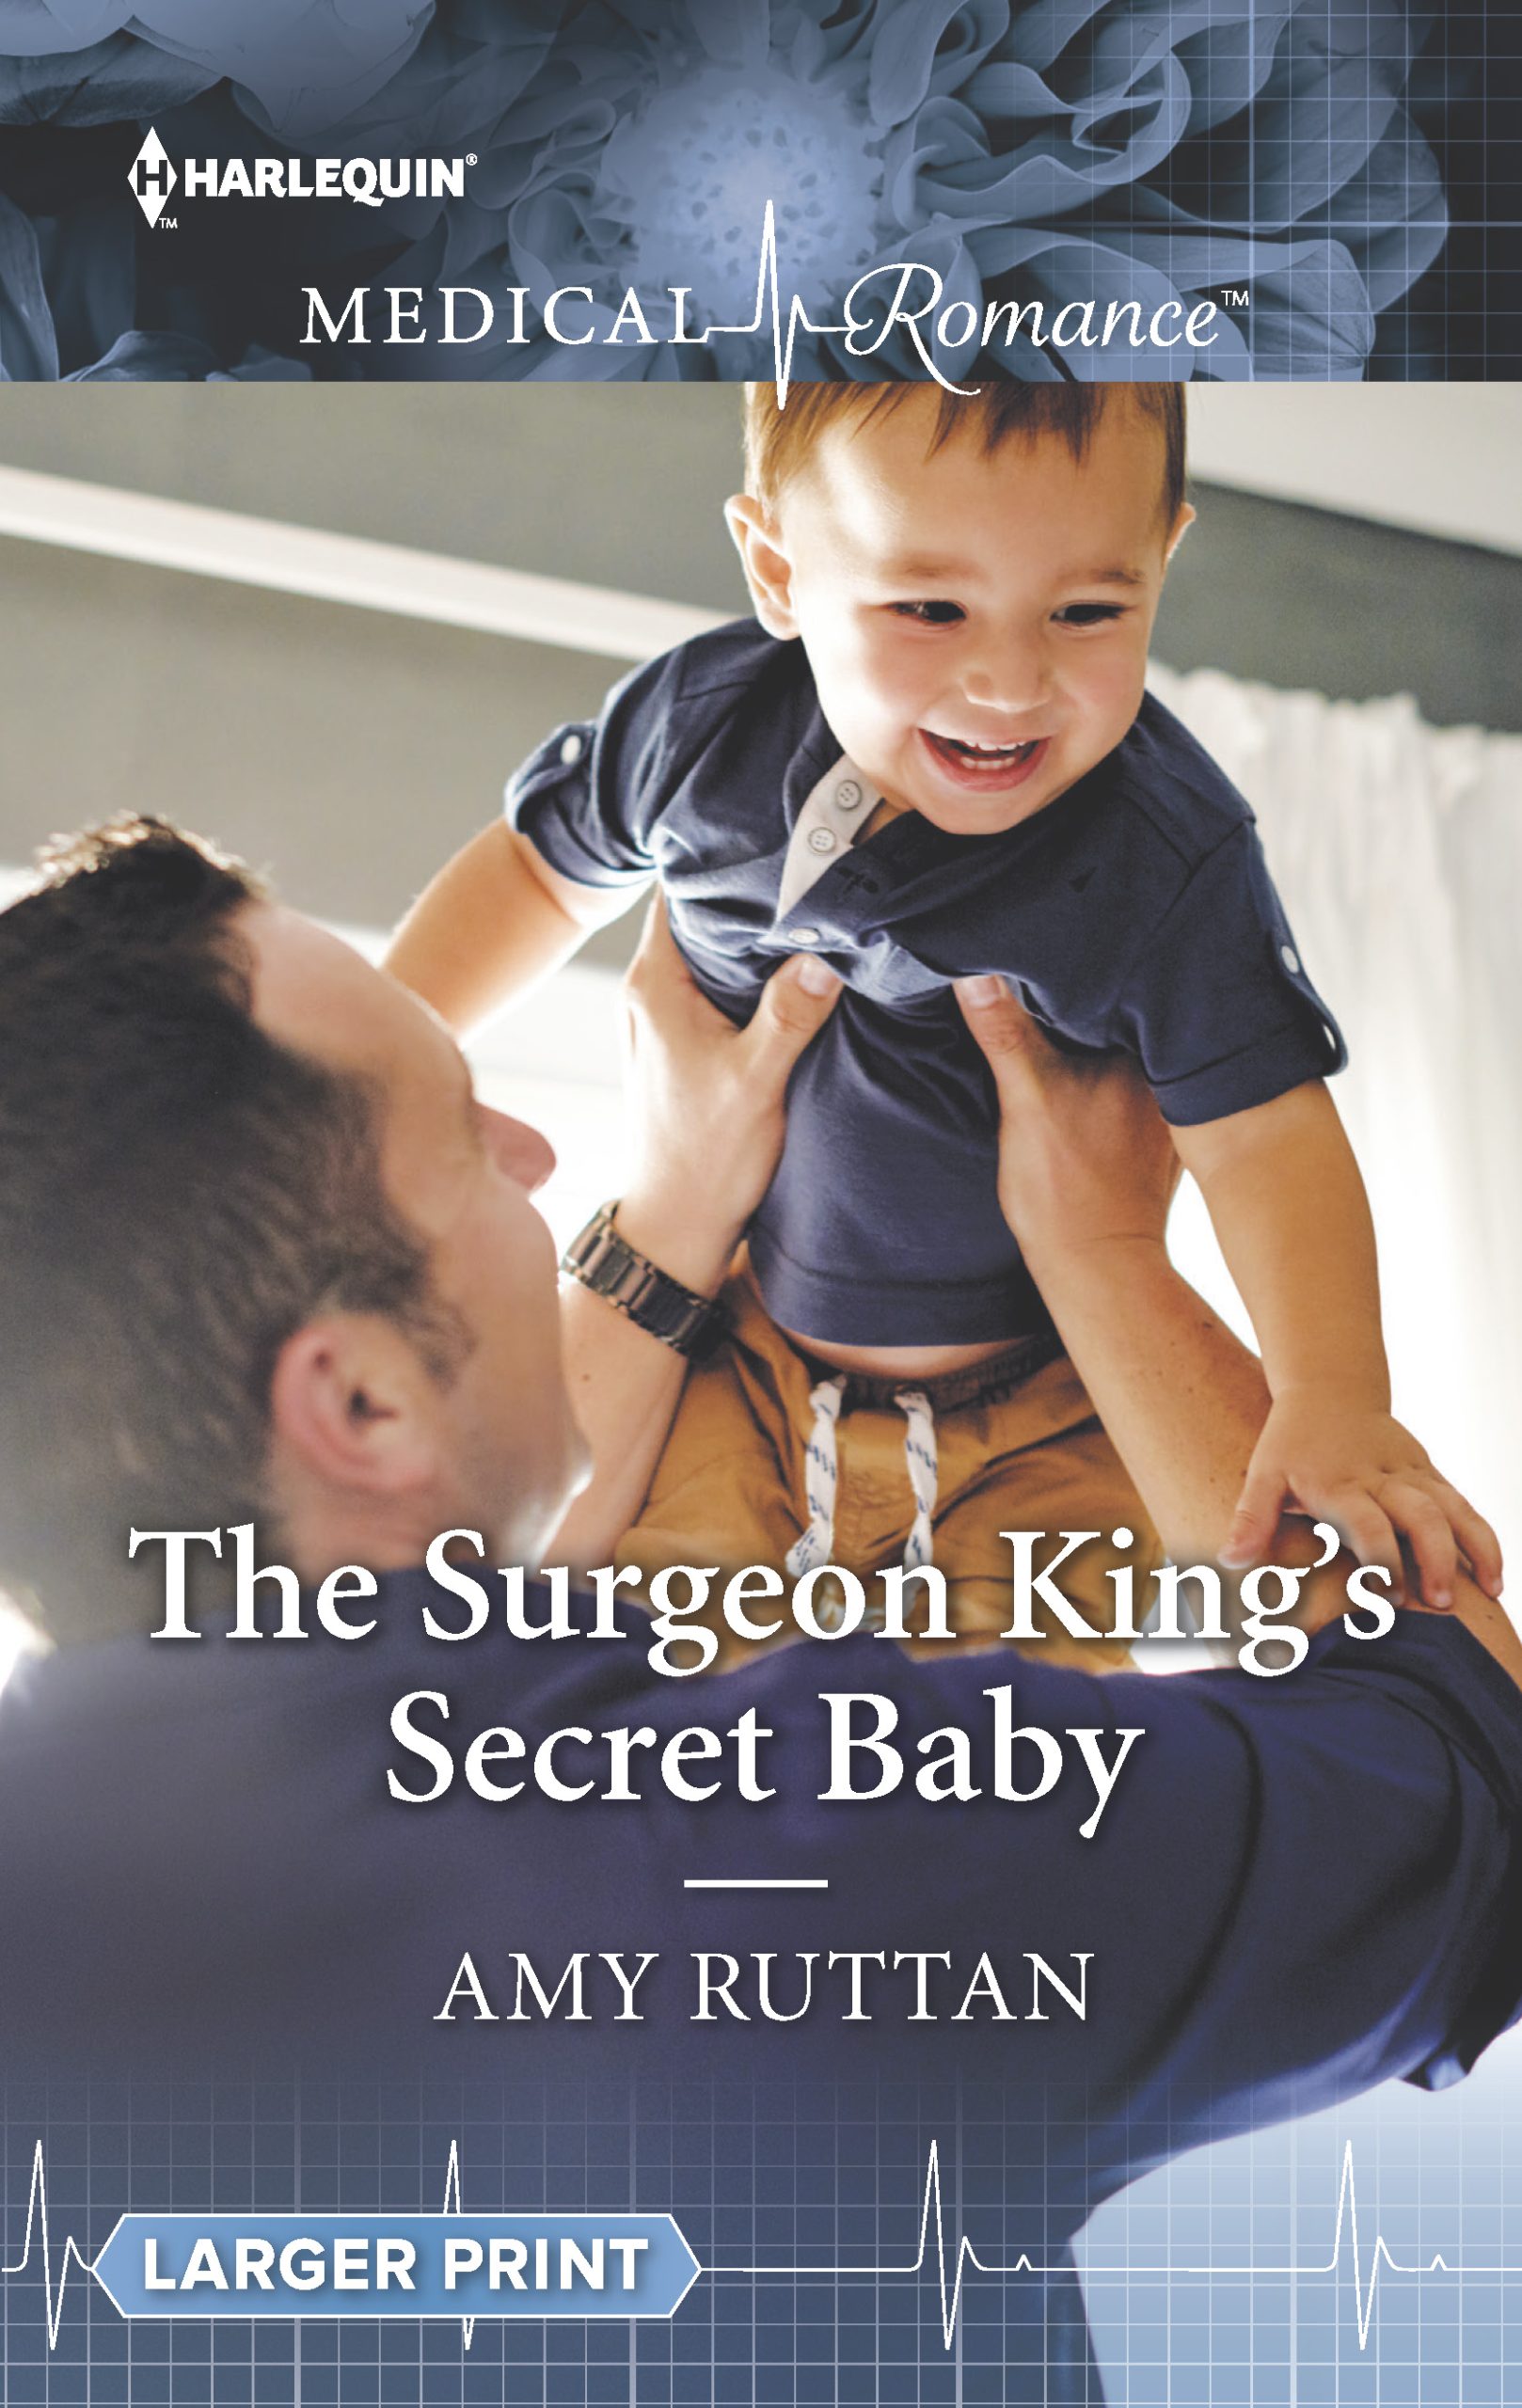 Book Cover for The Surgeon King's Secret Baby by Amy Ruttan